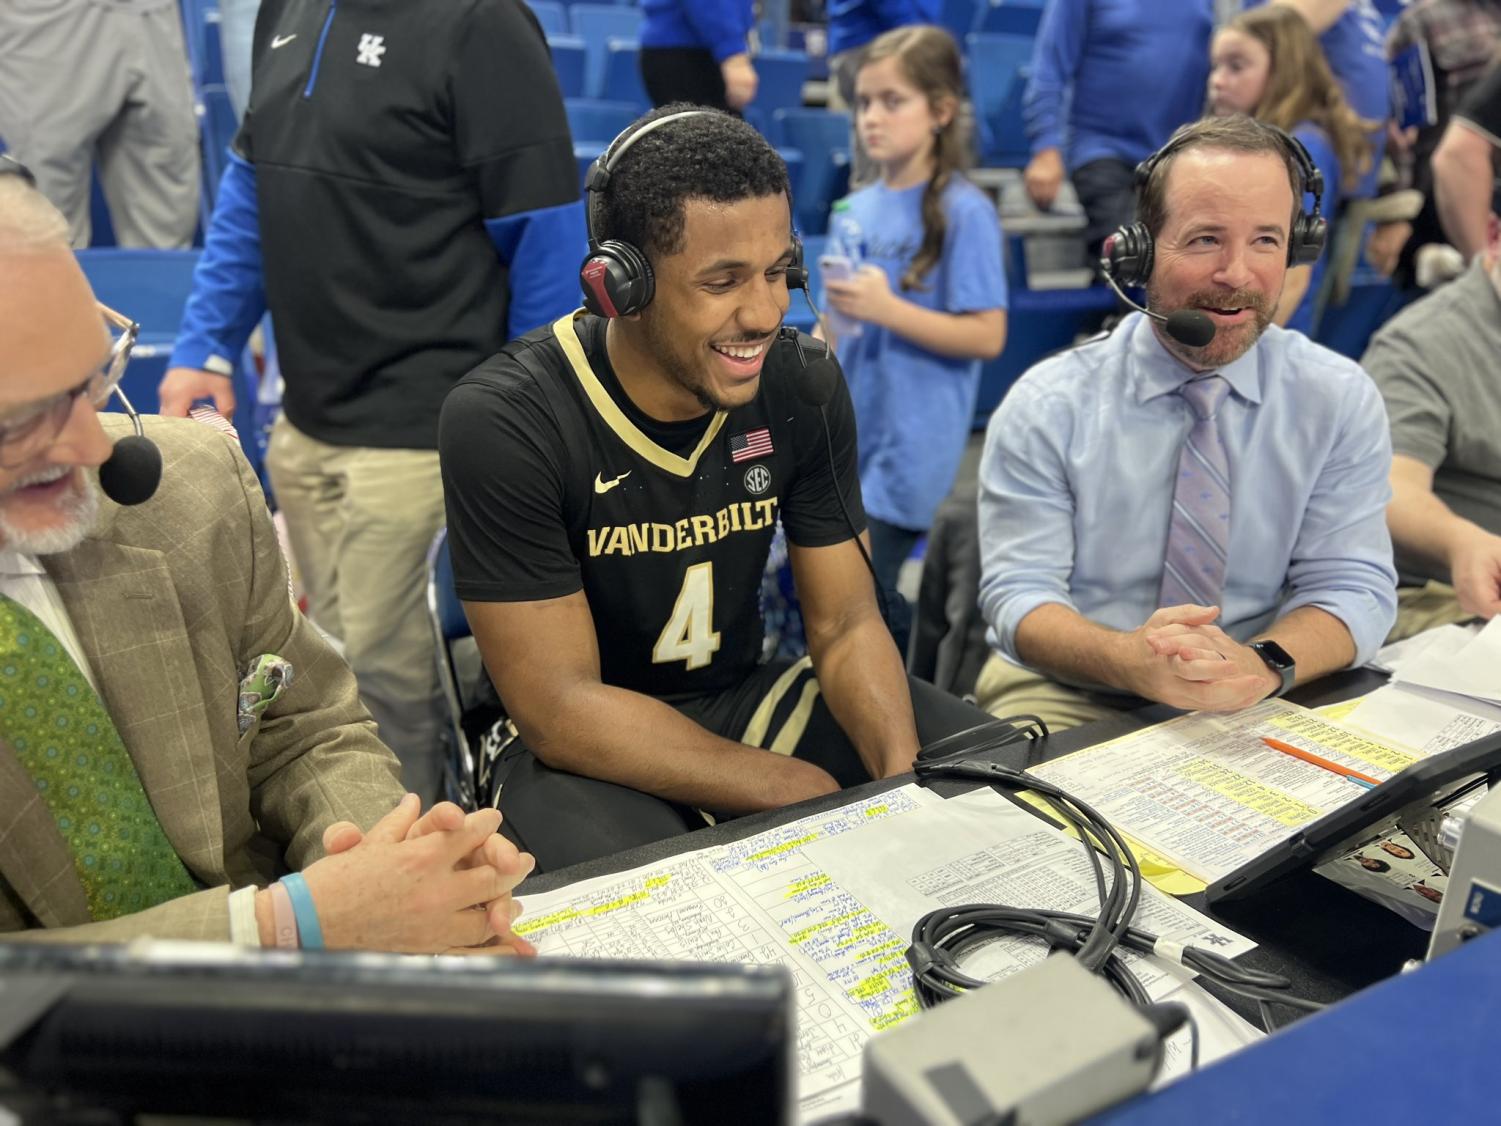 Jordan Wright talks with reporters after hitting a game-winner over Kentucky on March 1, 2023 (Vanderbilt Athletics).